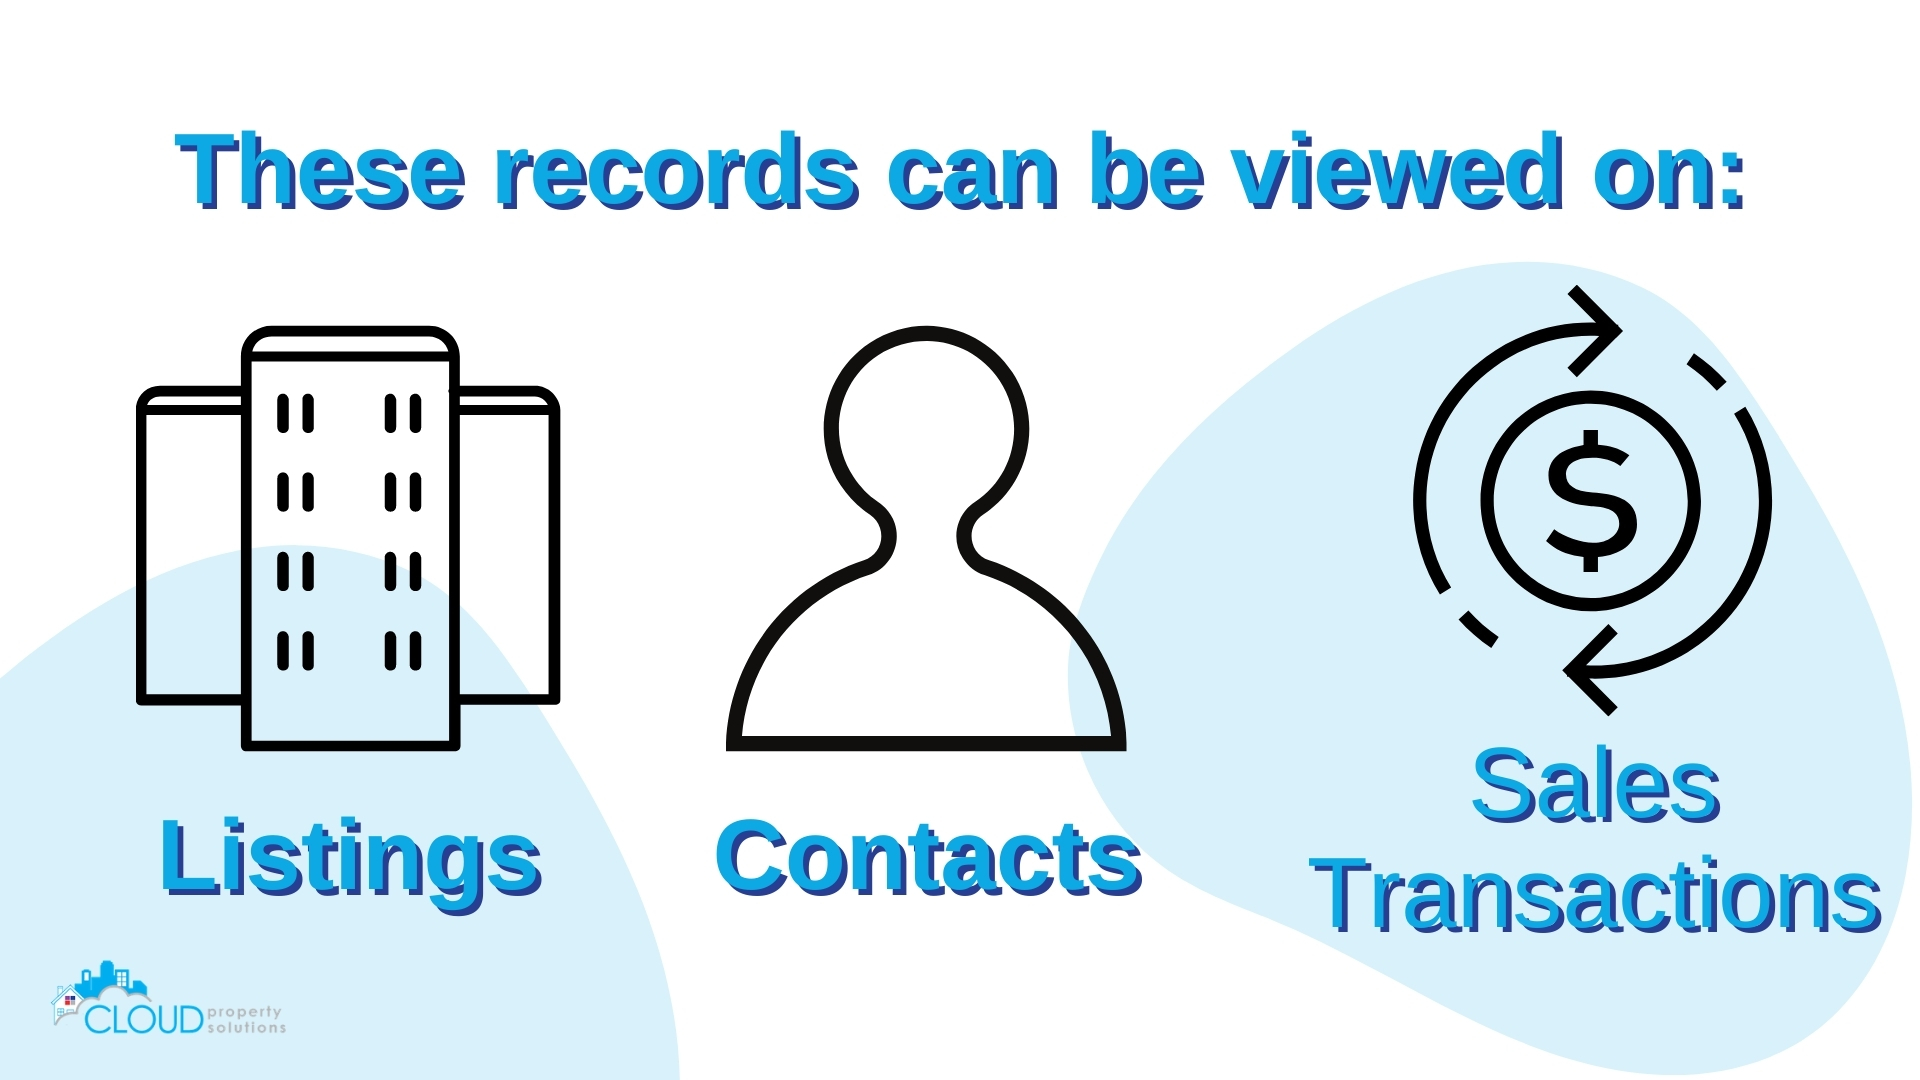 View records on various screens.